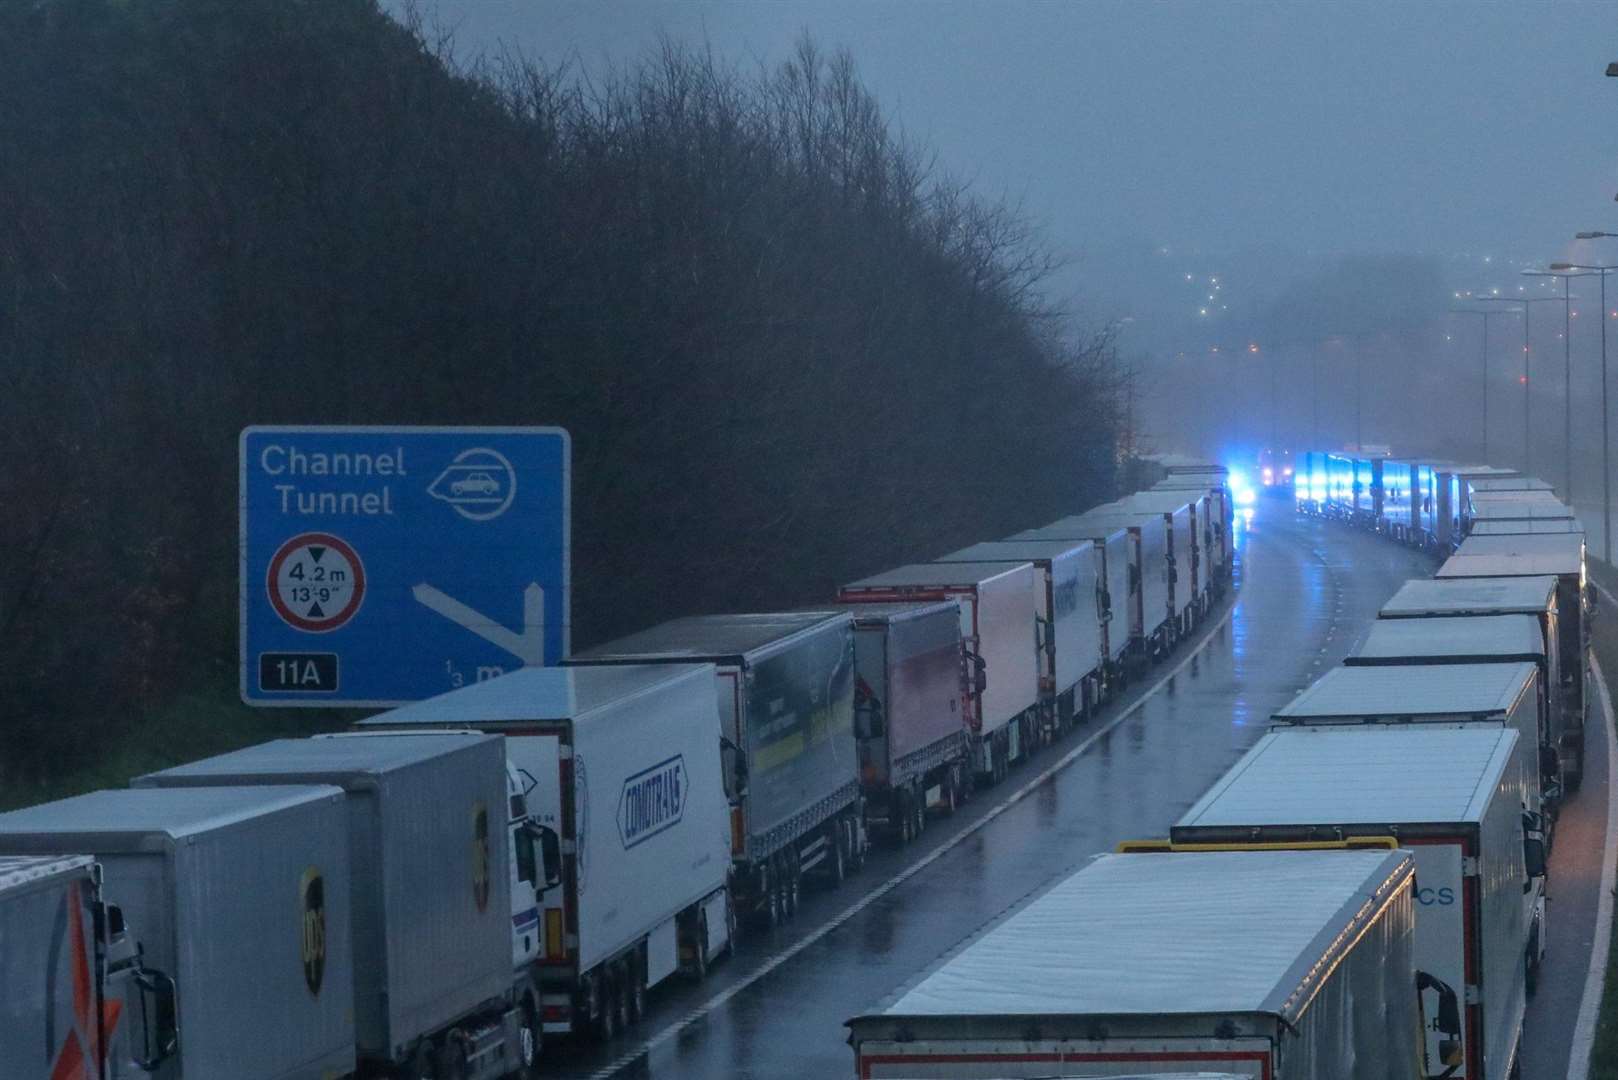 Operation Brock has been set up on the M20 to try and keep traffic moving if there are delays at Dover. Picture: UKNIP